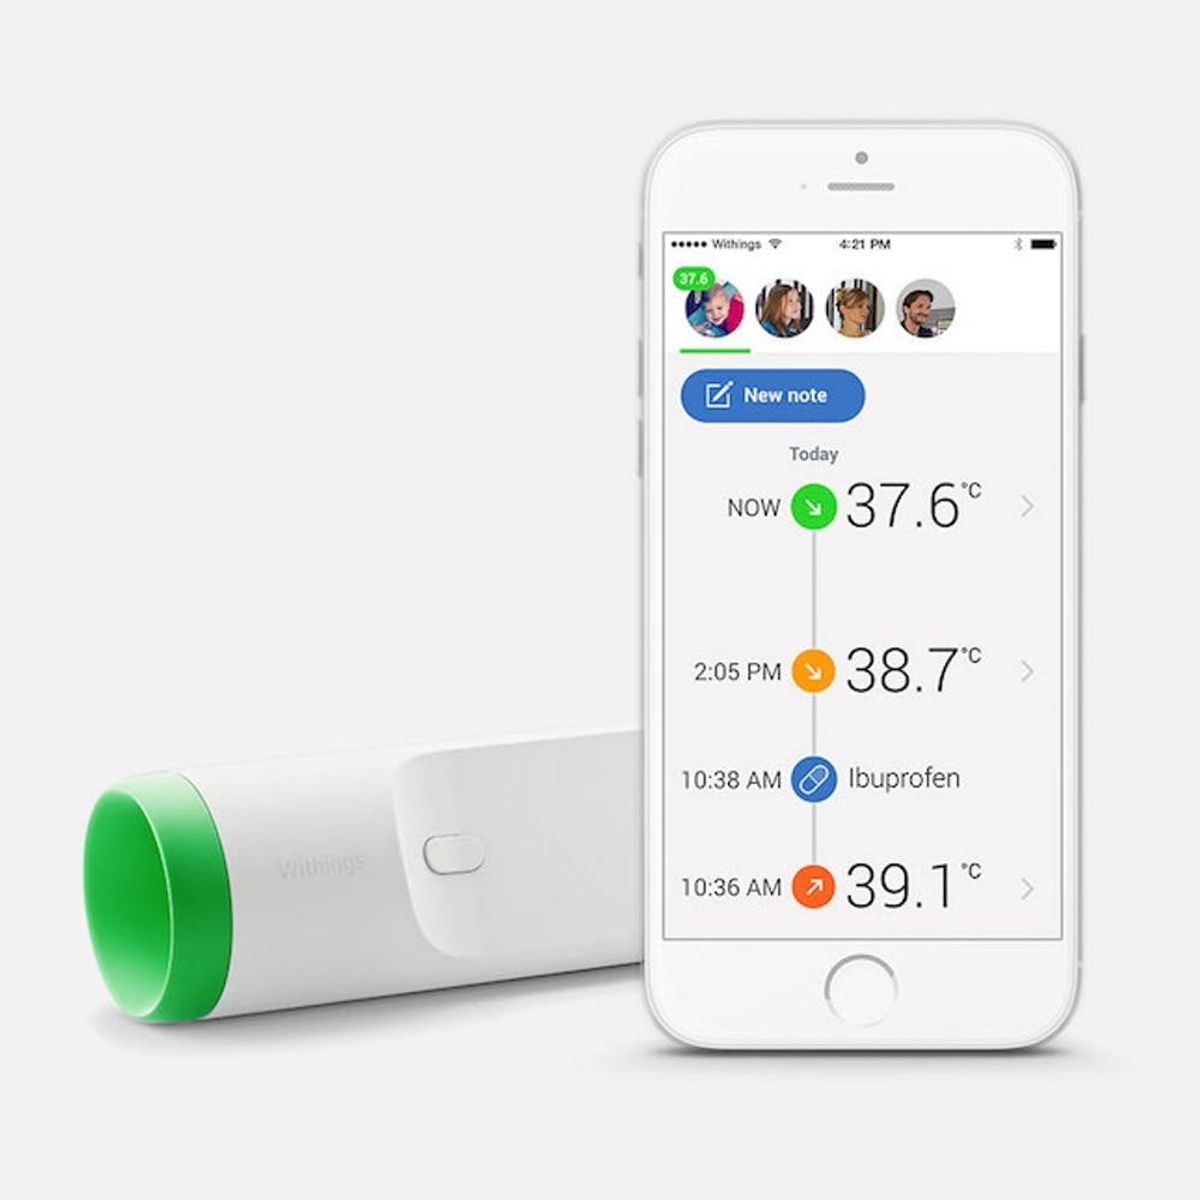 Here’s How All the Cool Parents Will Be Measuring Their Kids’ Temps in the Future